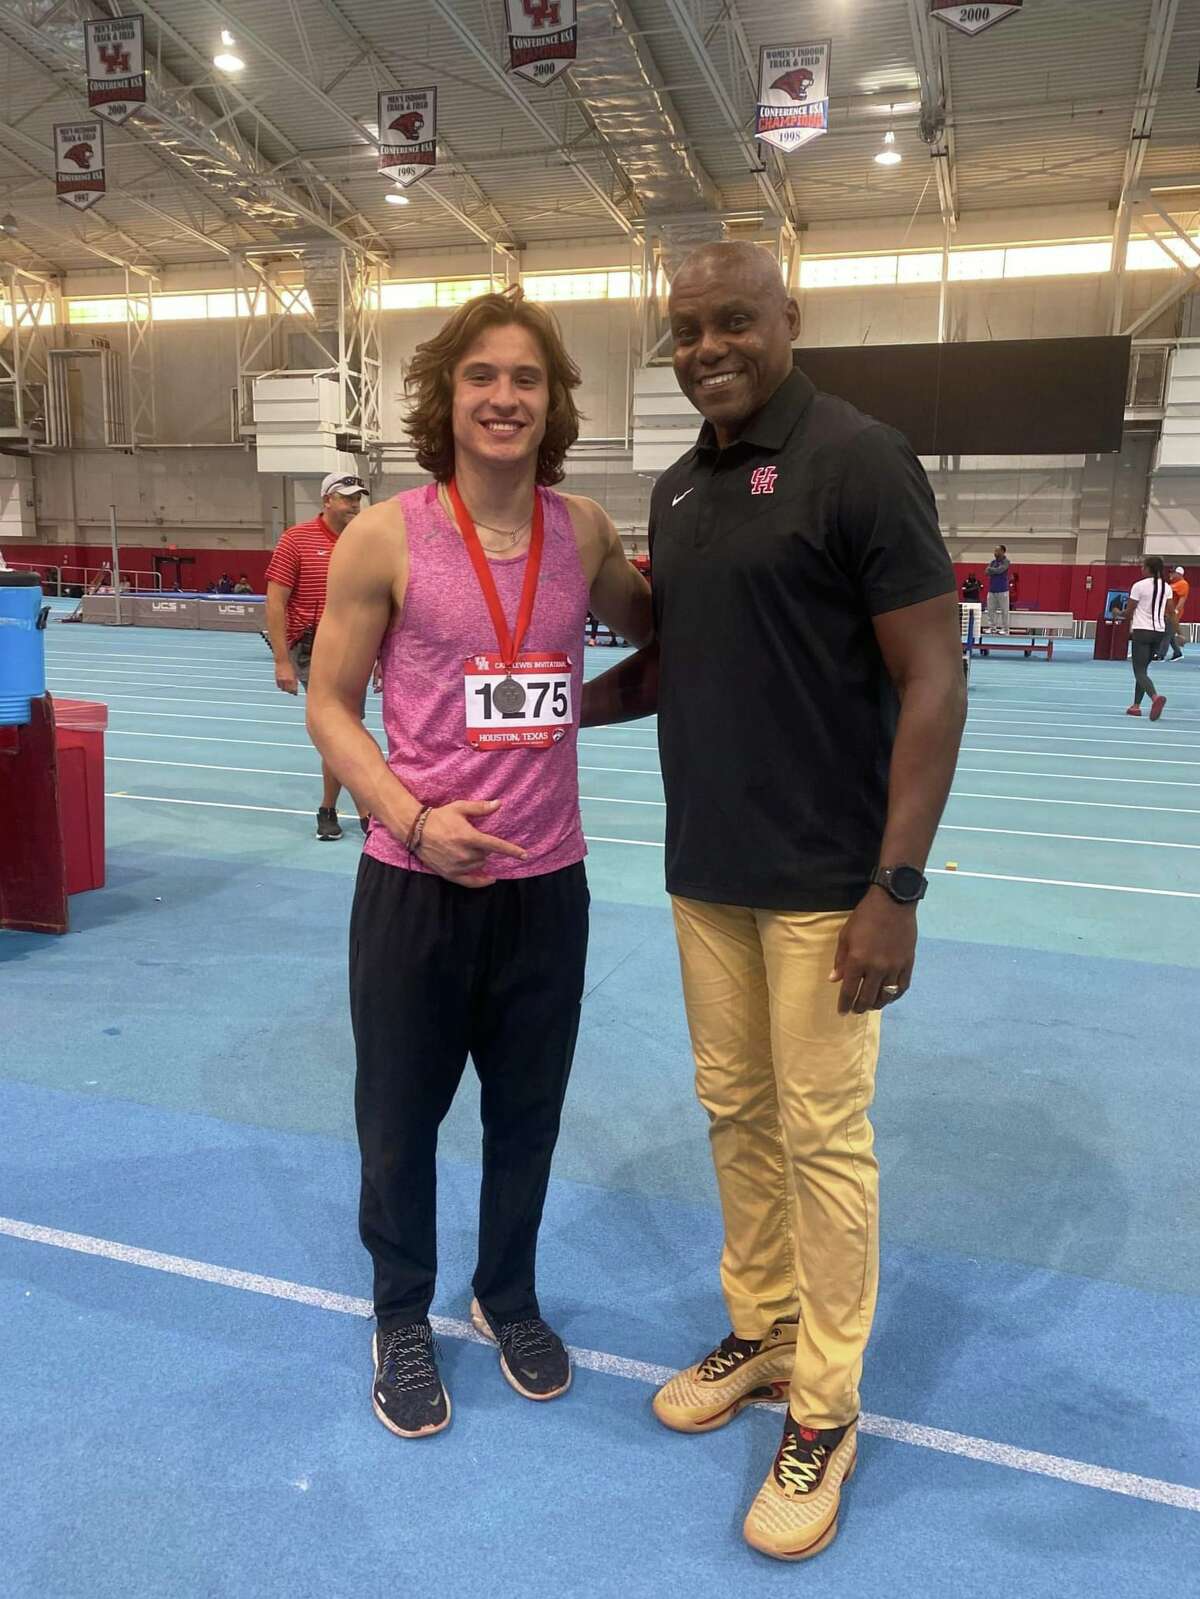 John Sanderson poses with Carl Lewis at the University of Houston.